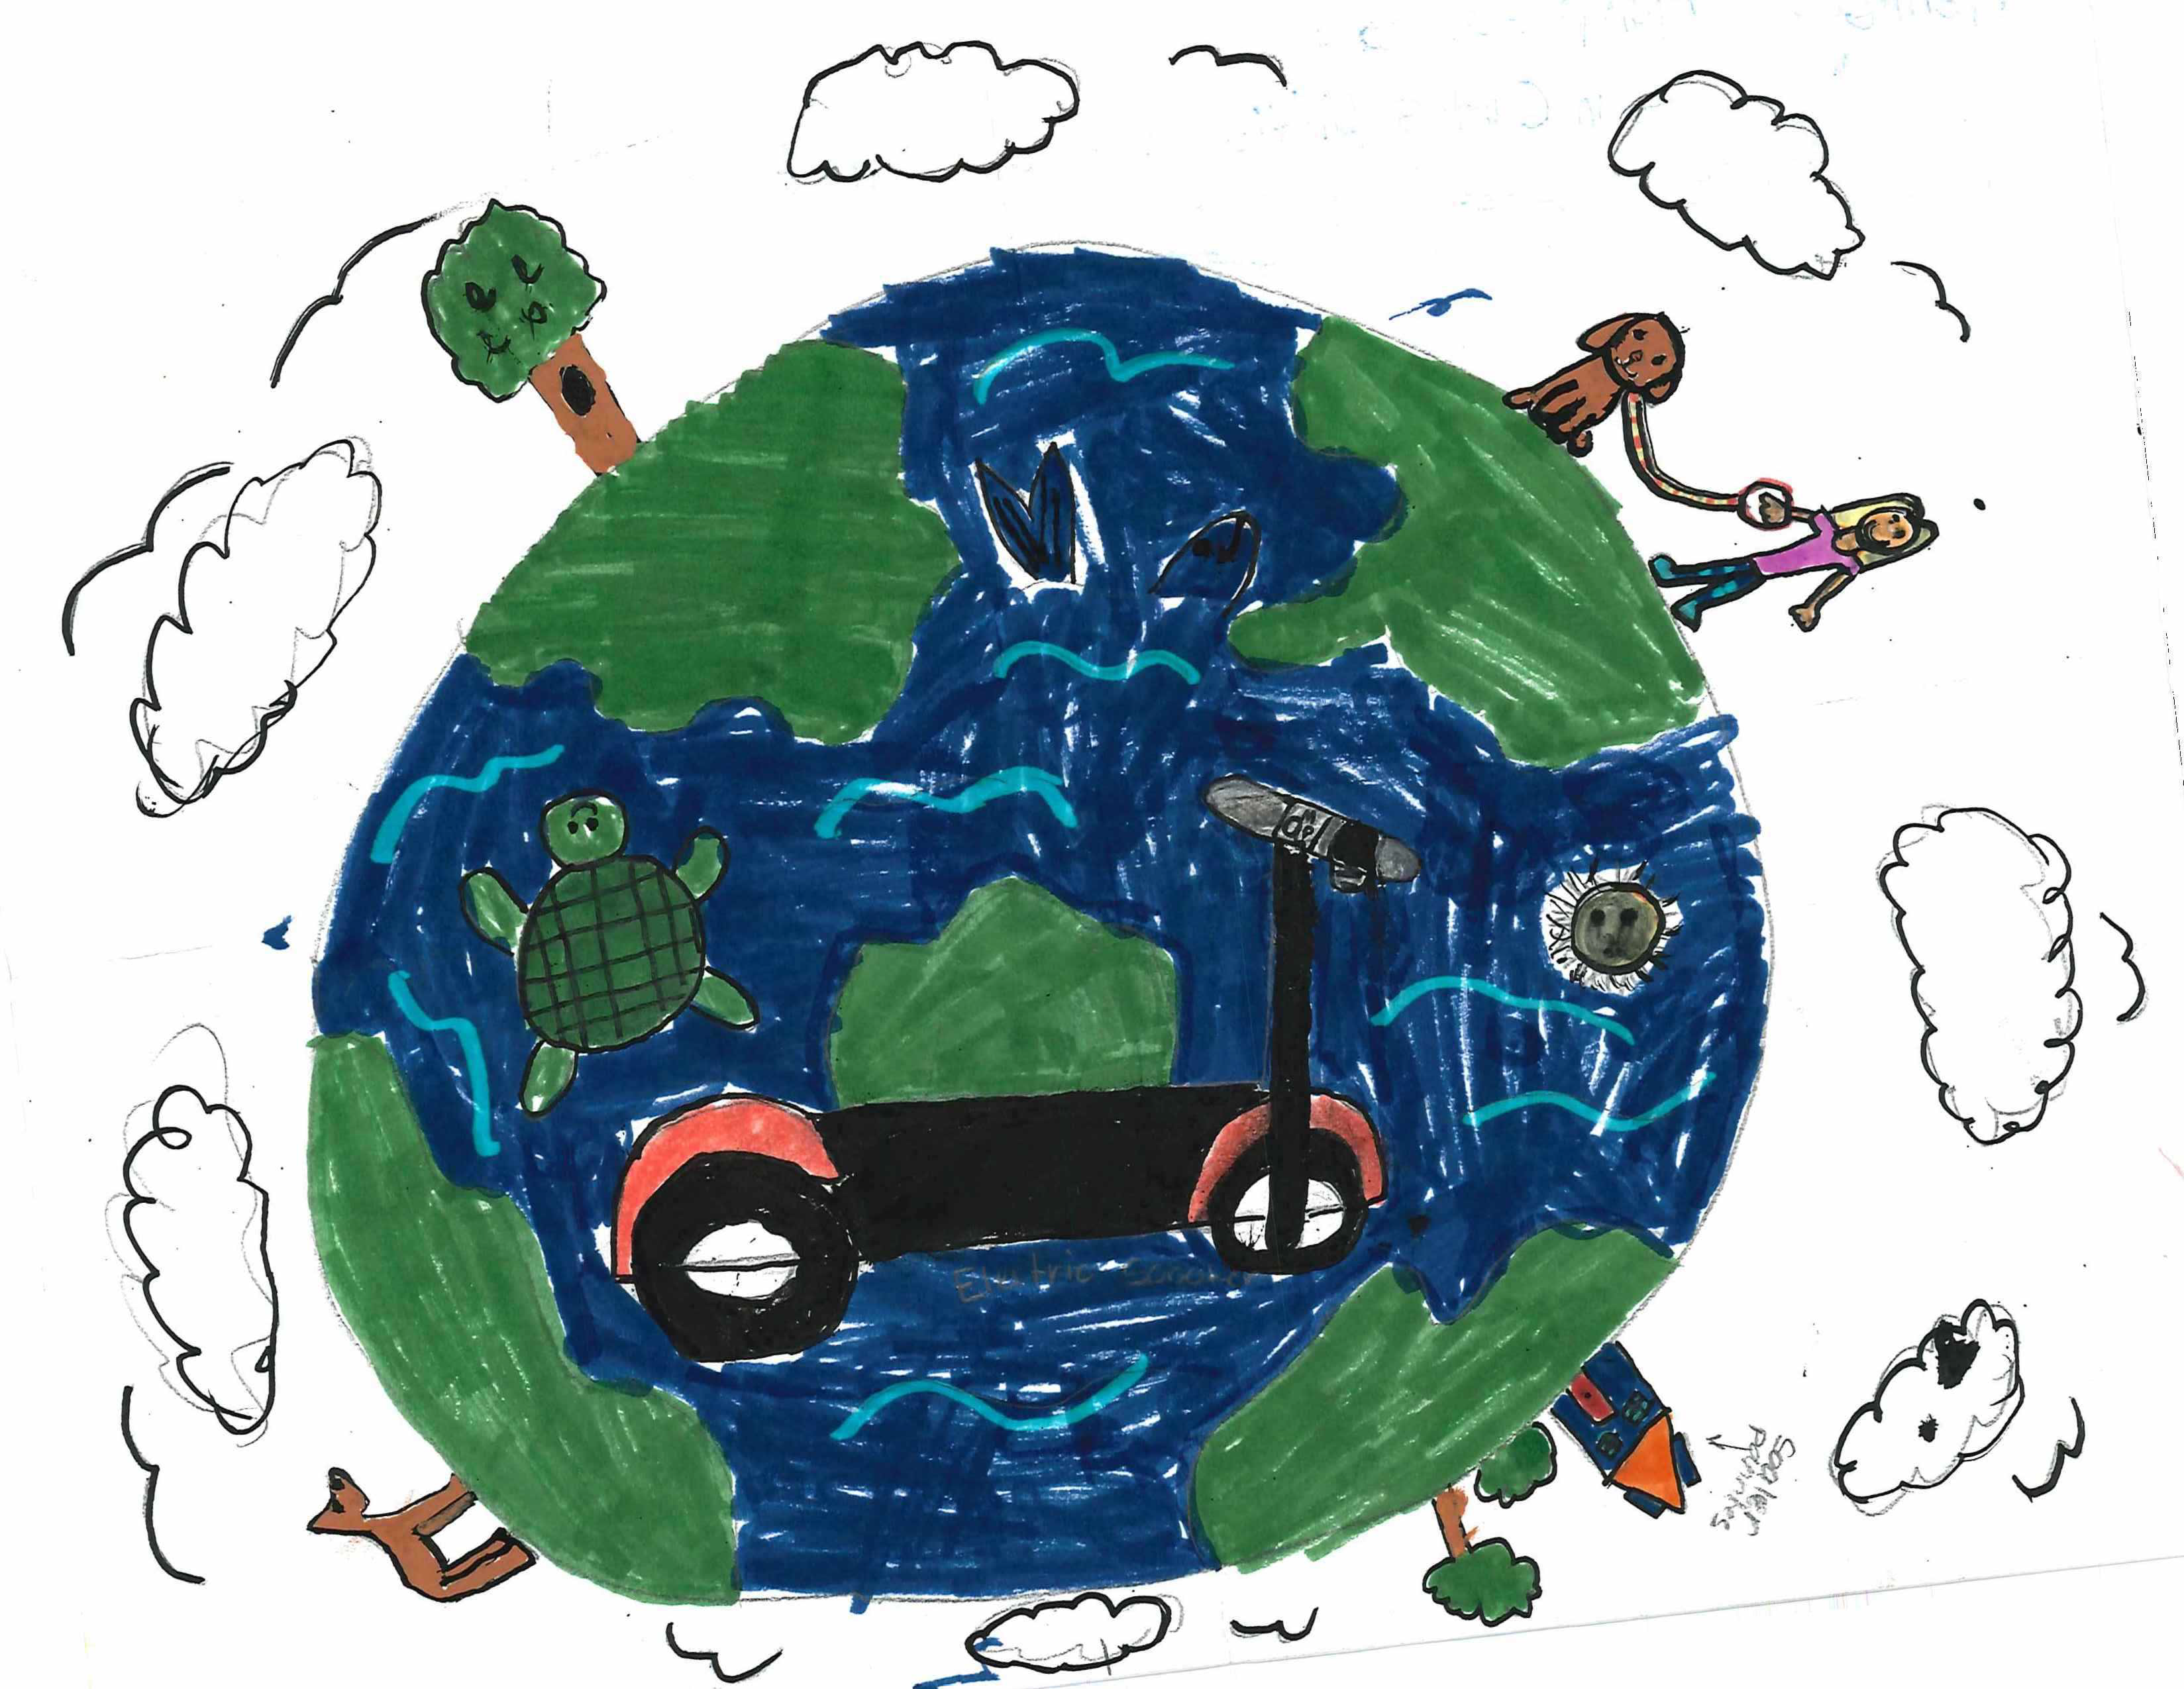 A drawing of earth with people, a house, a dog, a tree, on the perimeter, and a scooter and turtle in the middle. Clouds surround the earth